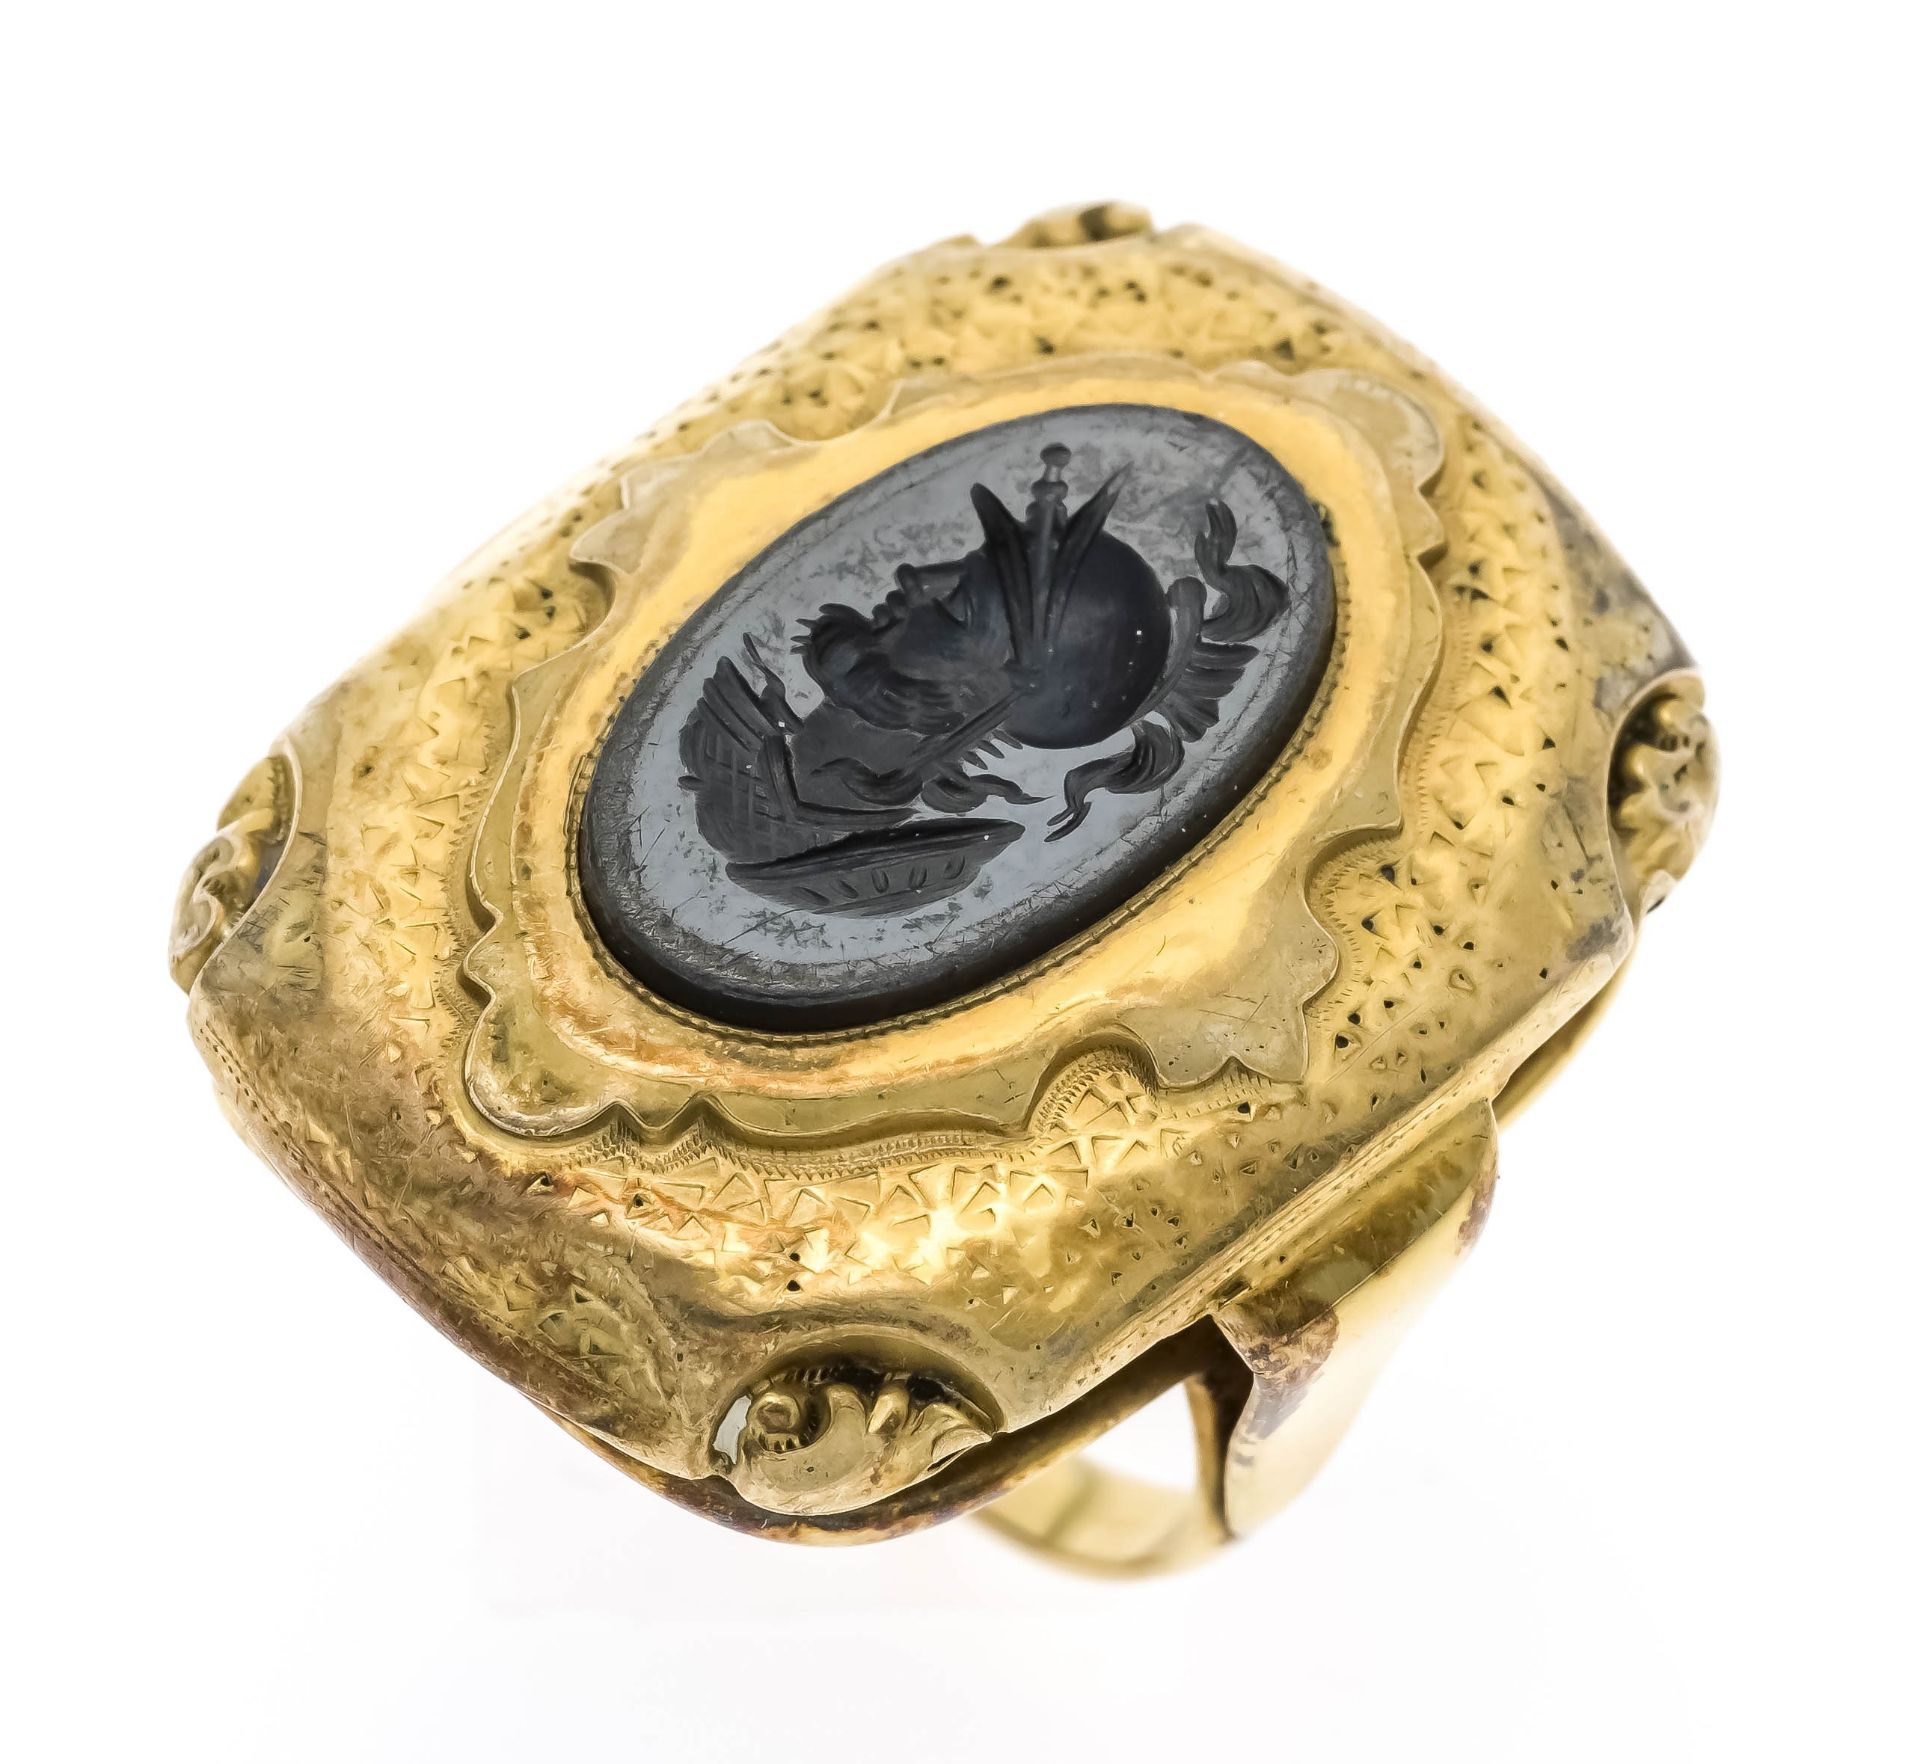 Foam gold ring GG 550/000 unmarked, tested, with an oval hematite 15 x 9 mm, finely cut with a